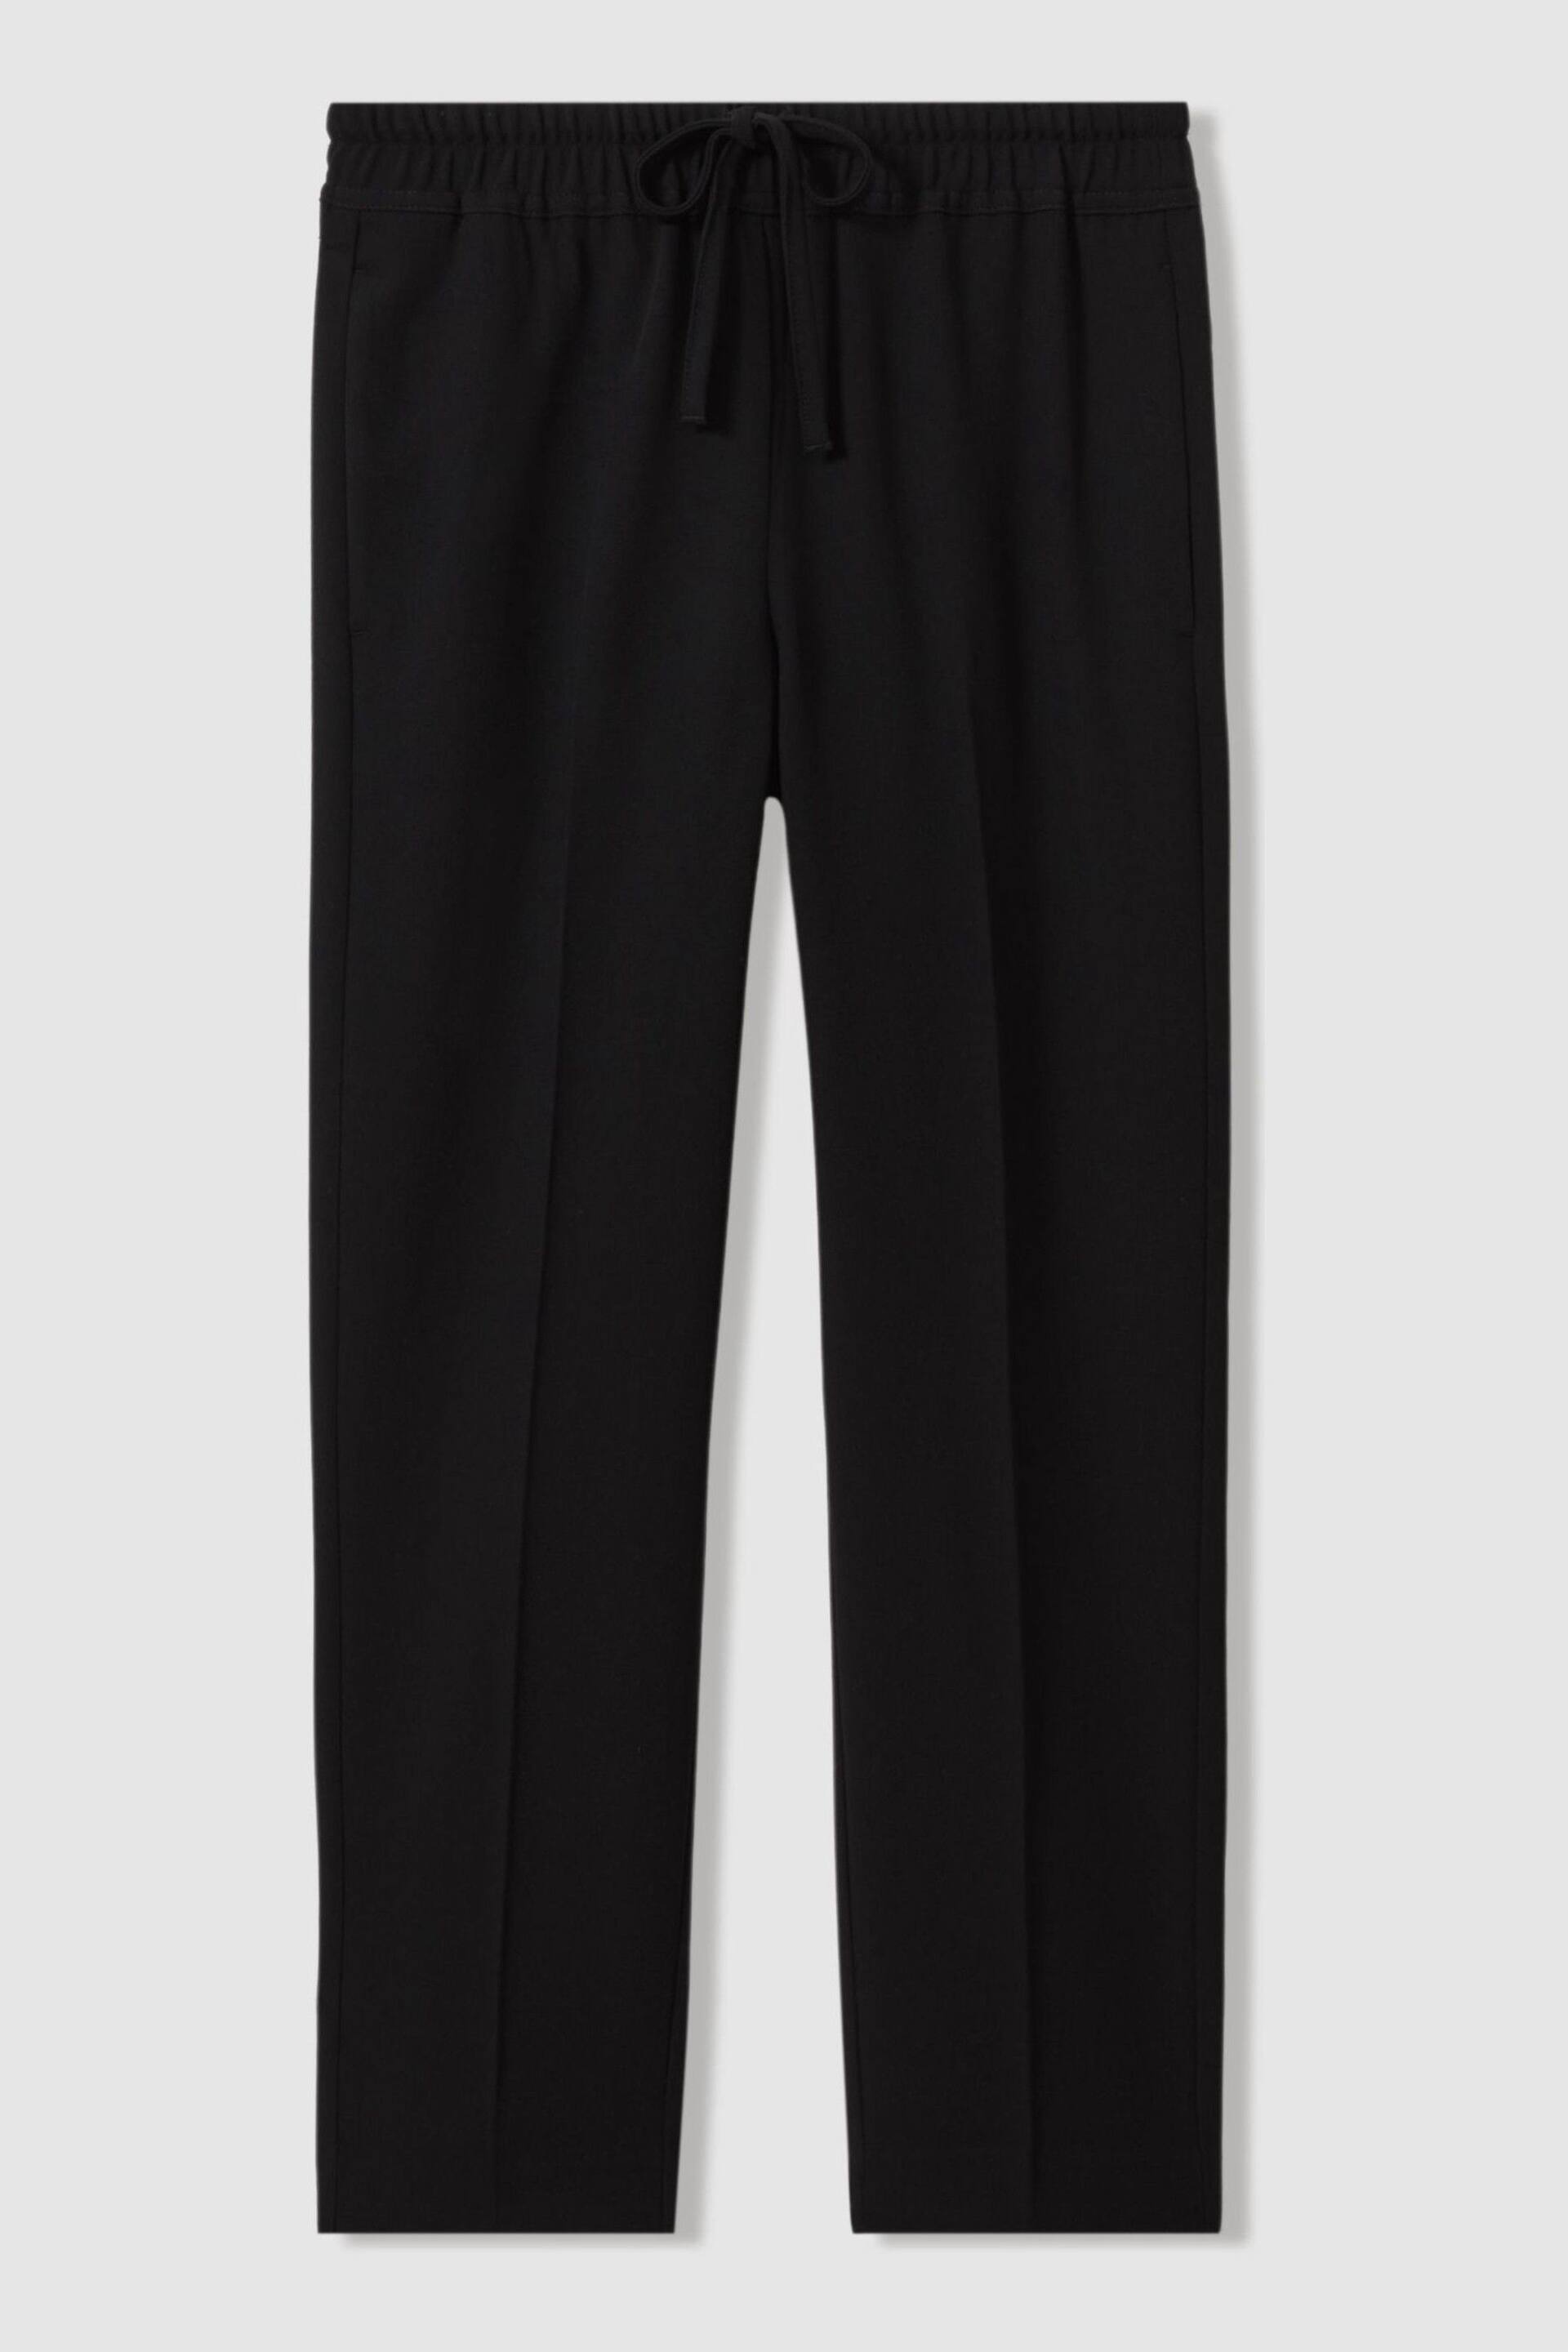 Reiss Black Hailey Petite Tapered Pull On Trousers - Image 2 of 6